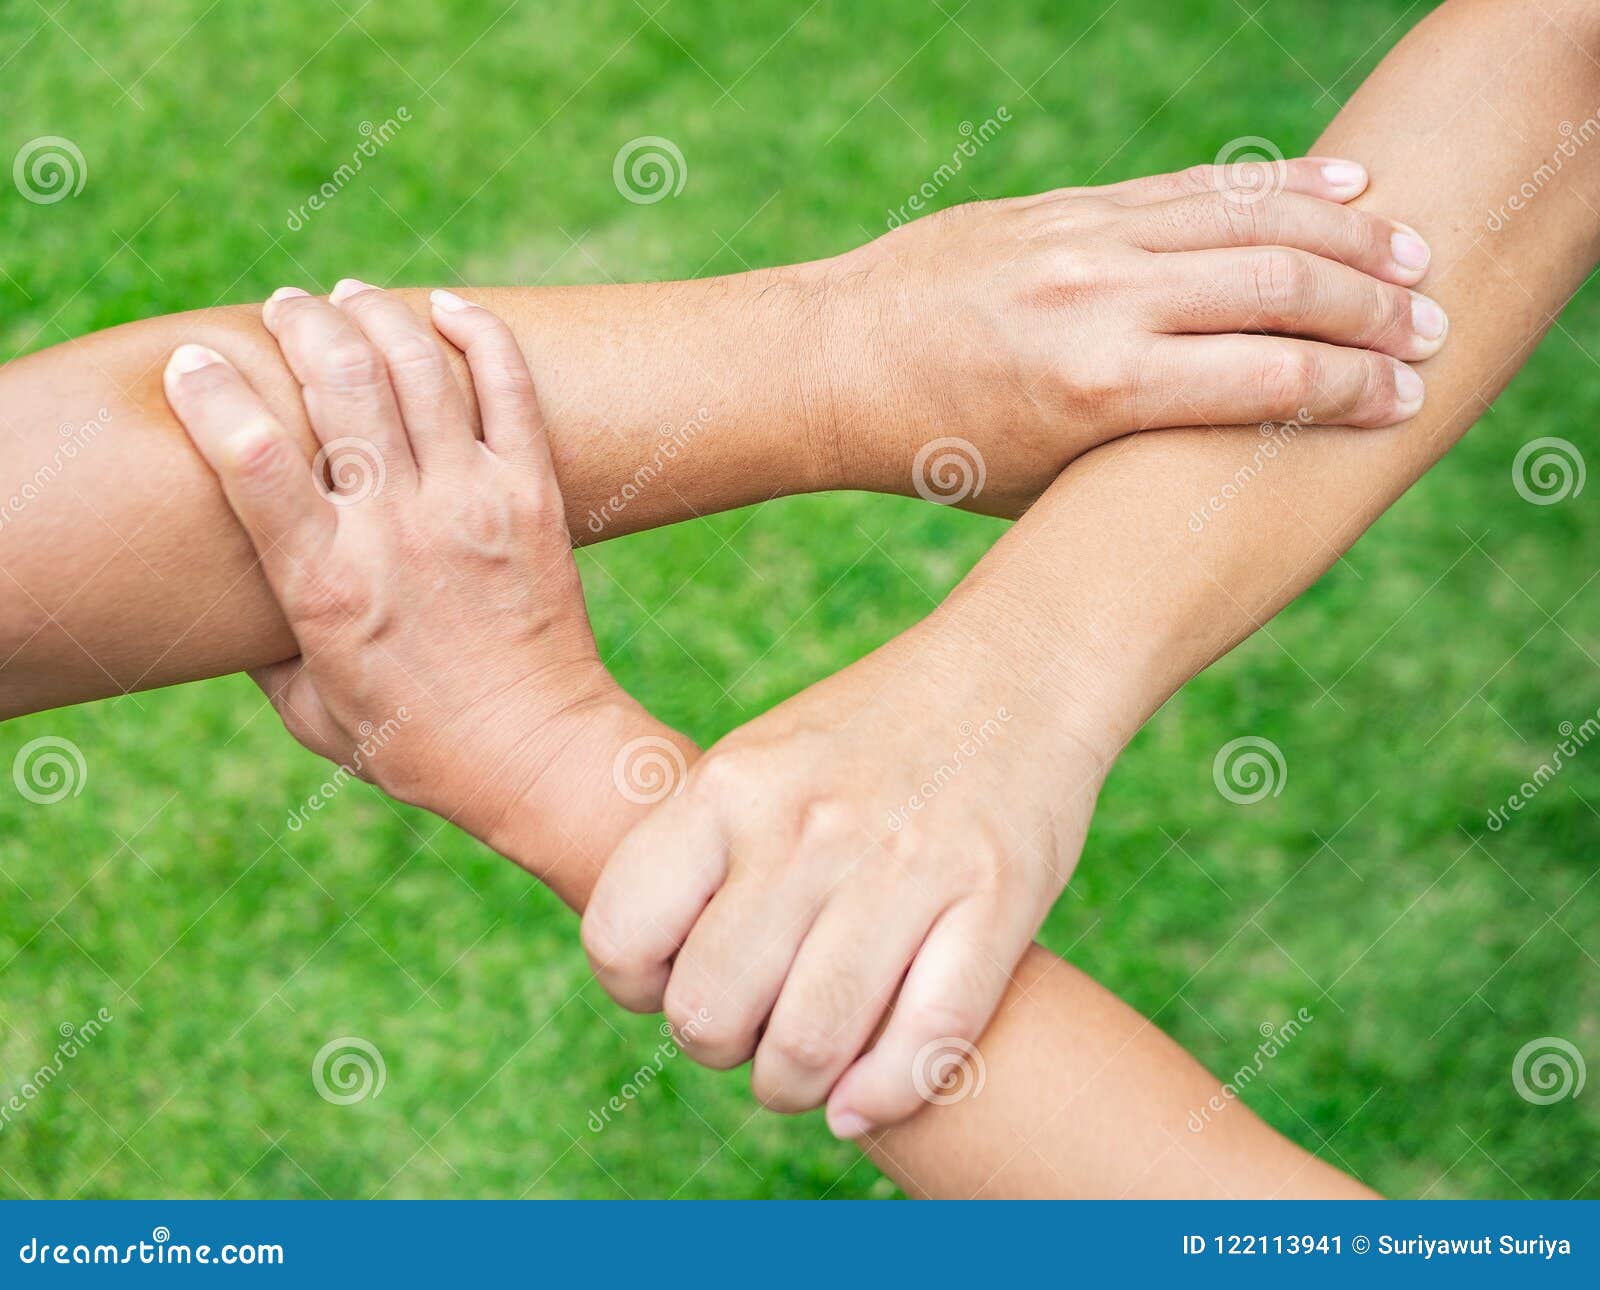 three-people-join-hands-together-grass-background-friendship-three-people-join-hands-together-grass-background-friendship-122113941.jpg